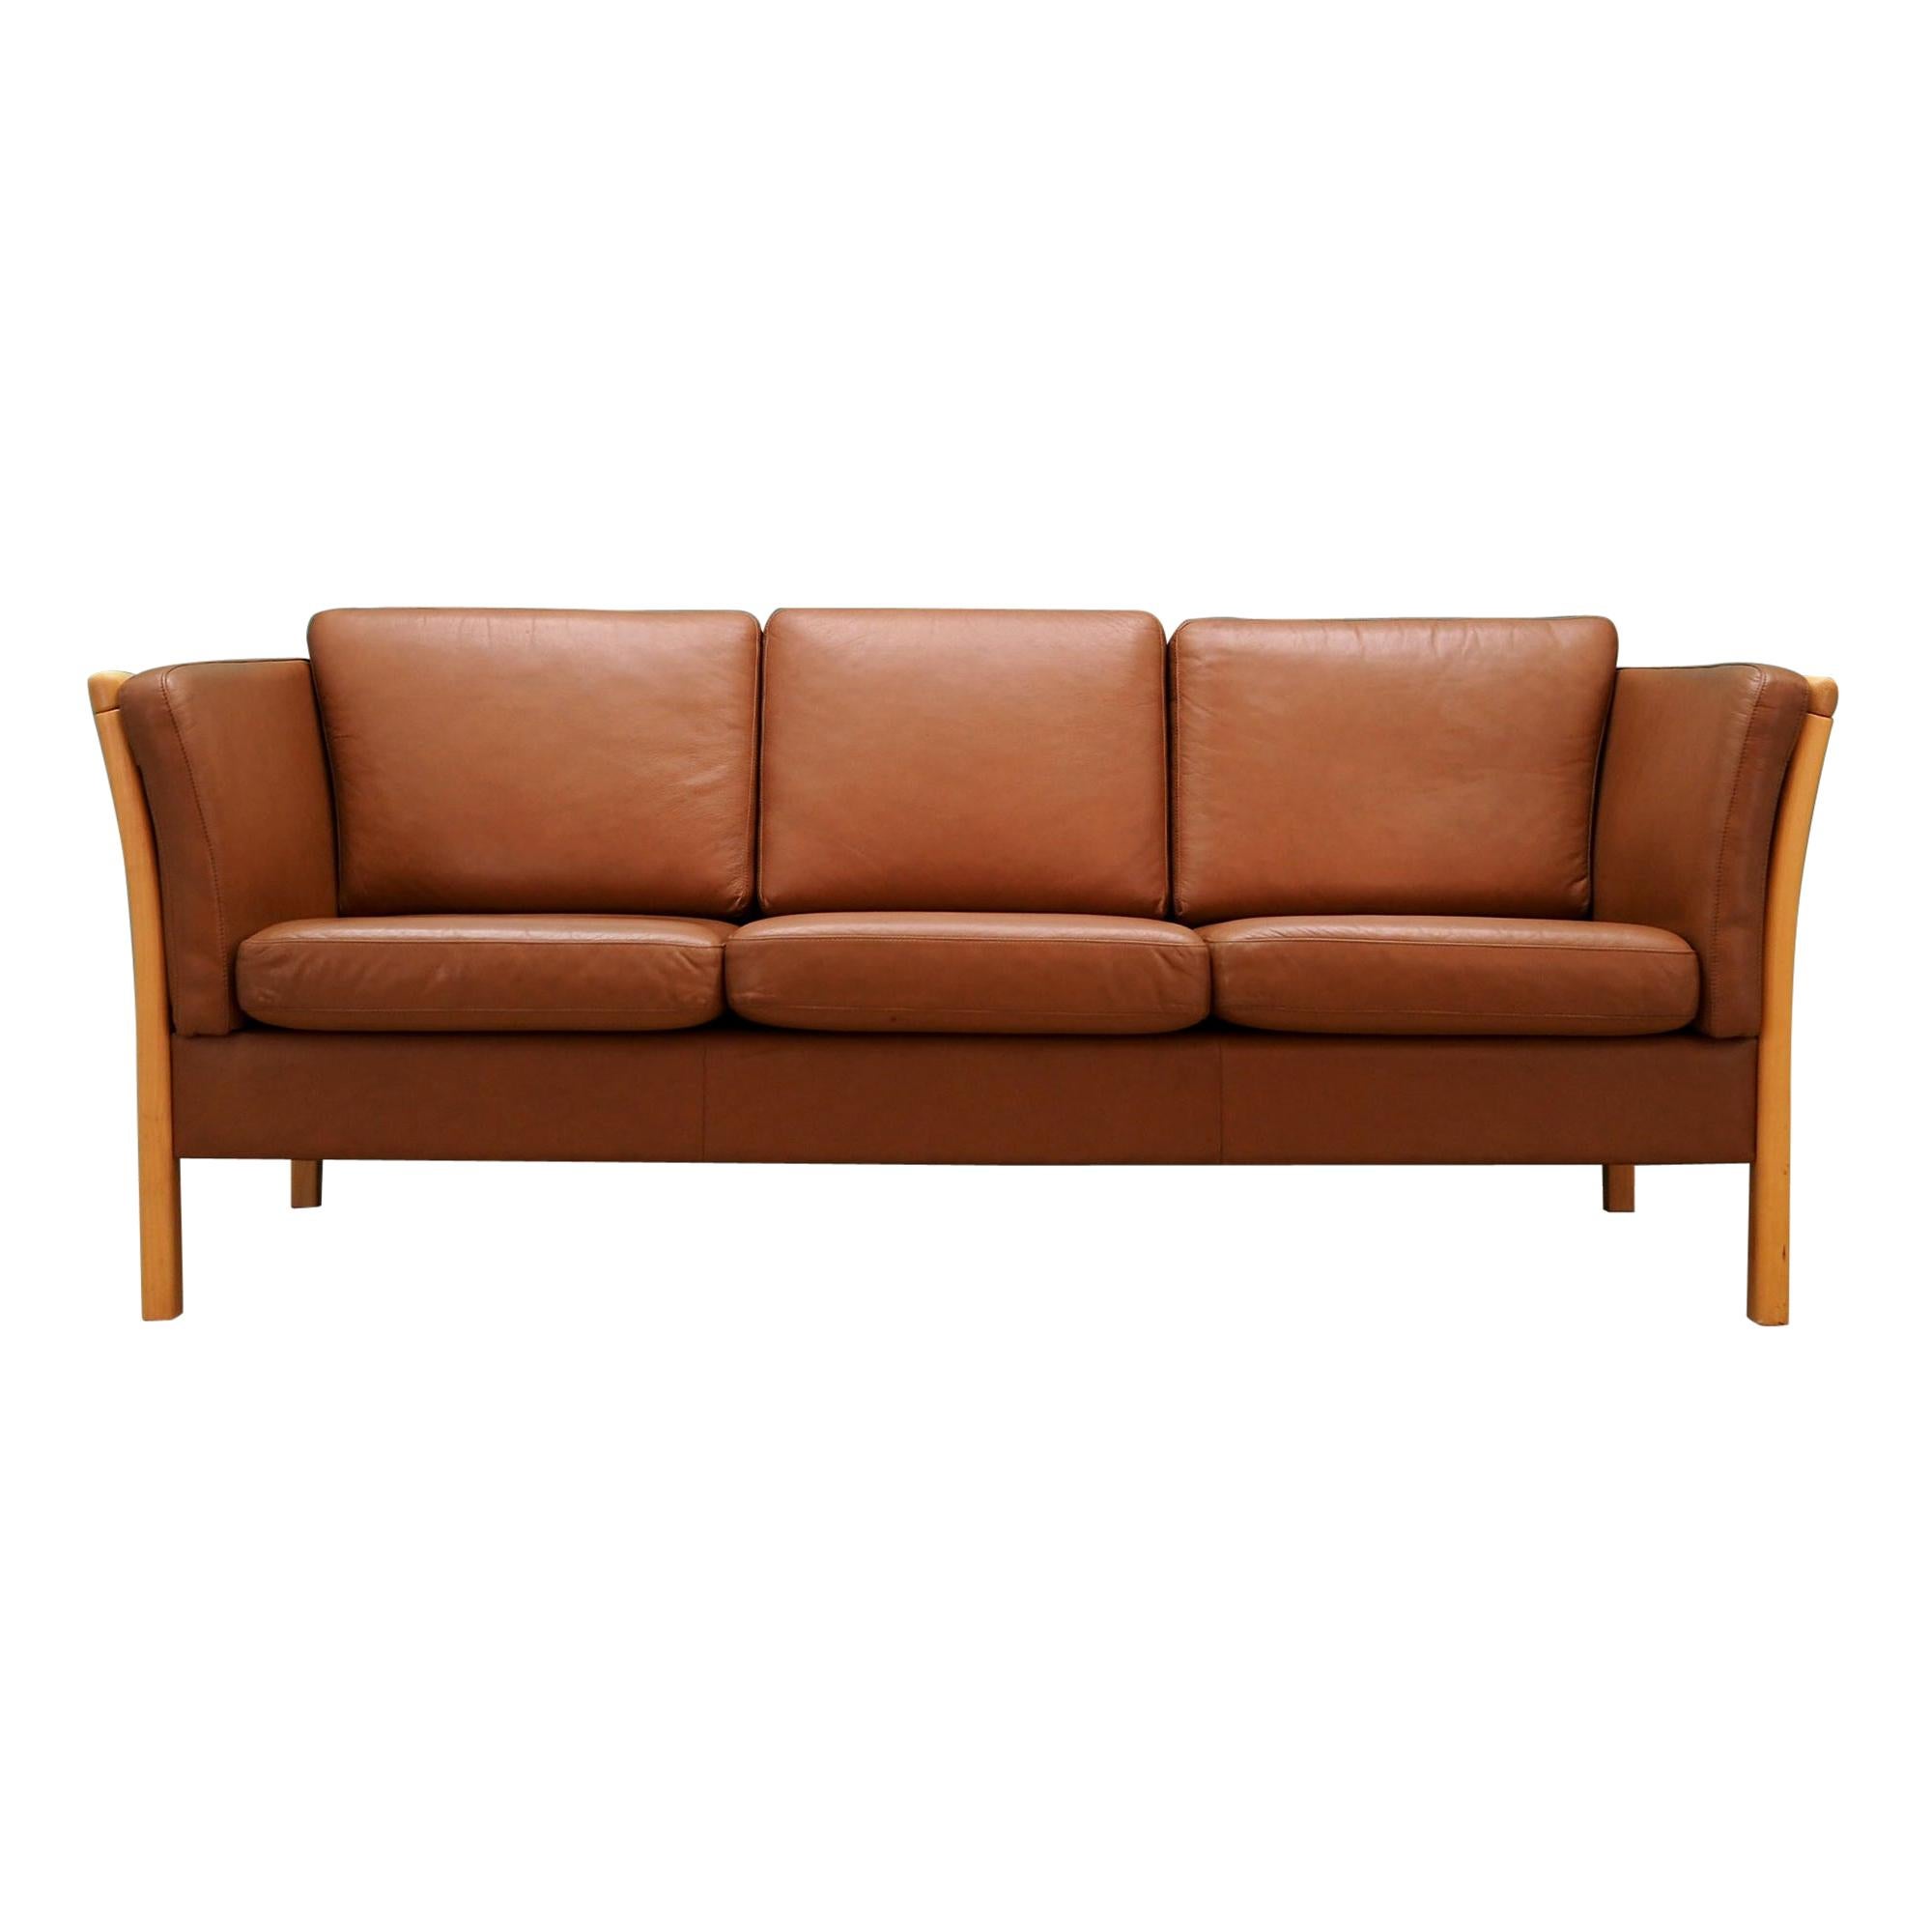 Stouby Sofa Retro 1960s Brown Leather